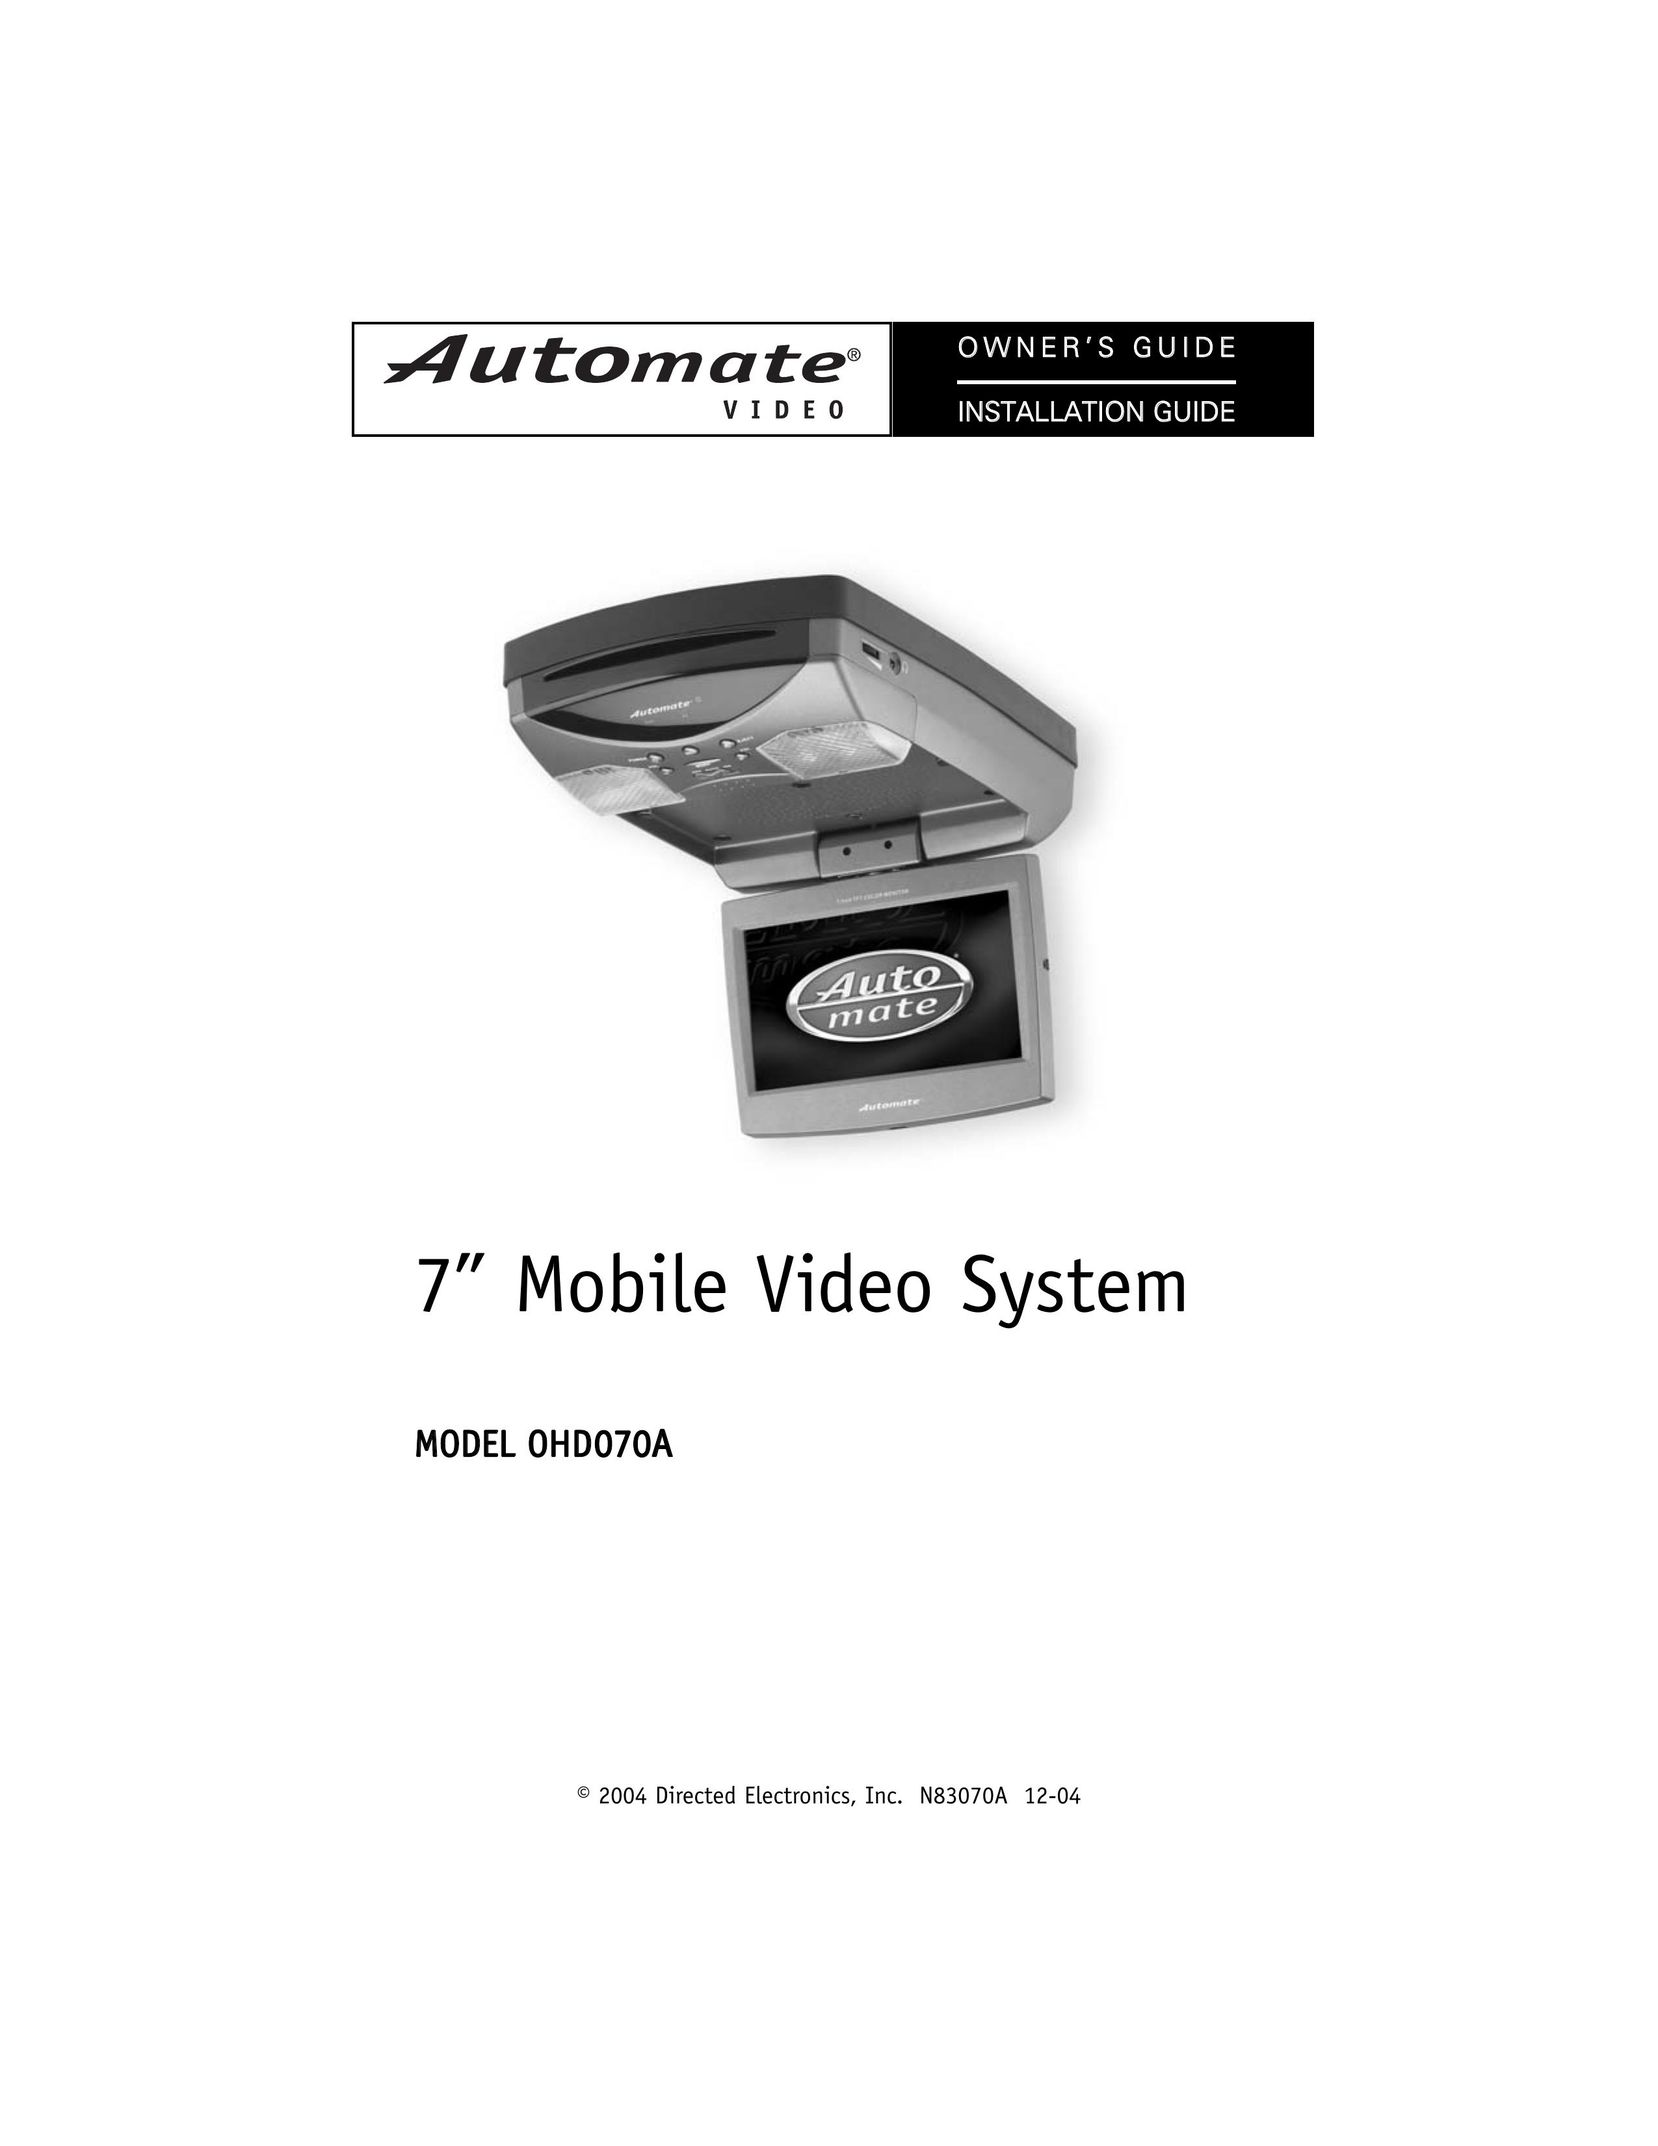 Directed Electronics OHD070A Car Video System User Manual